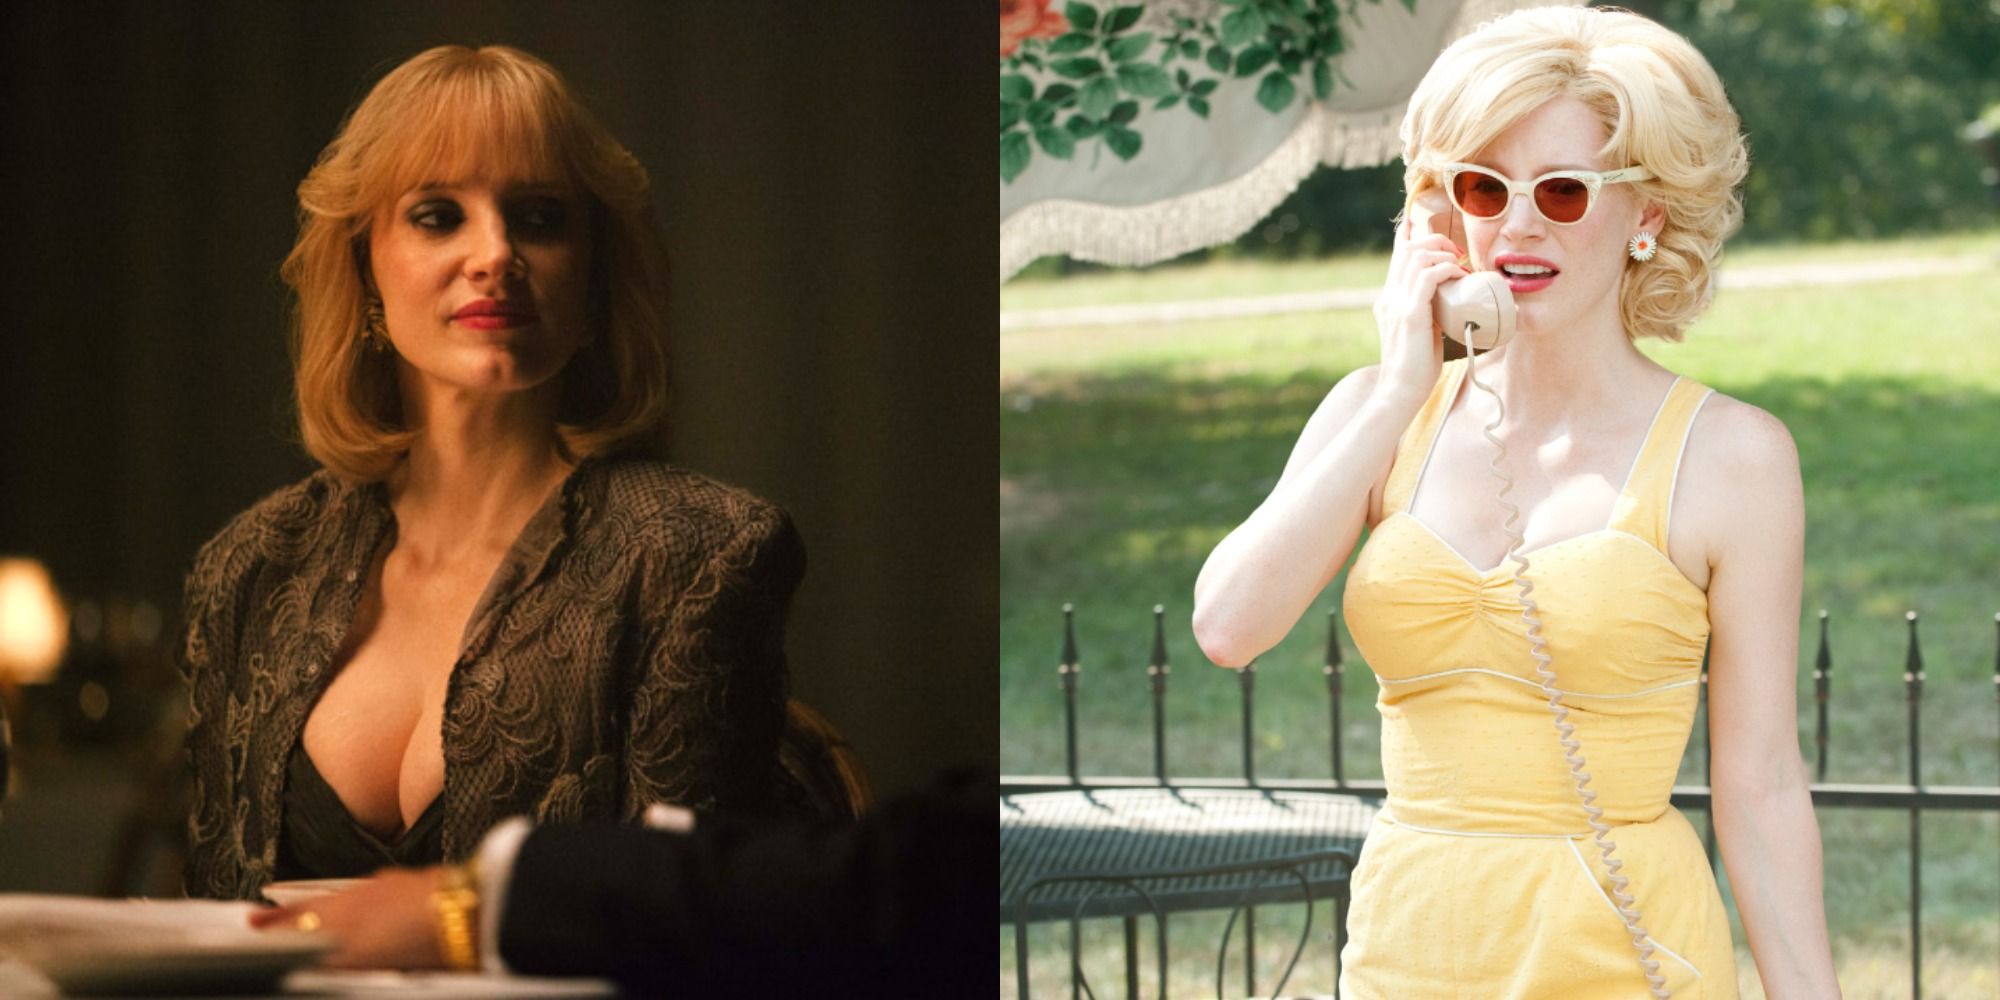 Split image showing Jessica Chastain in A Most Violent Year and The Help